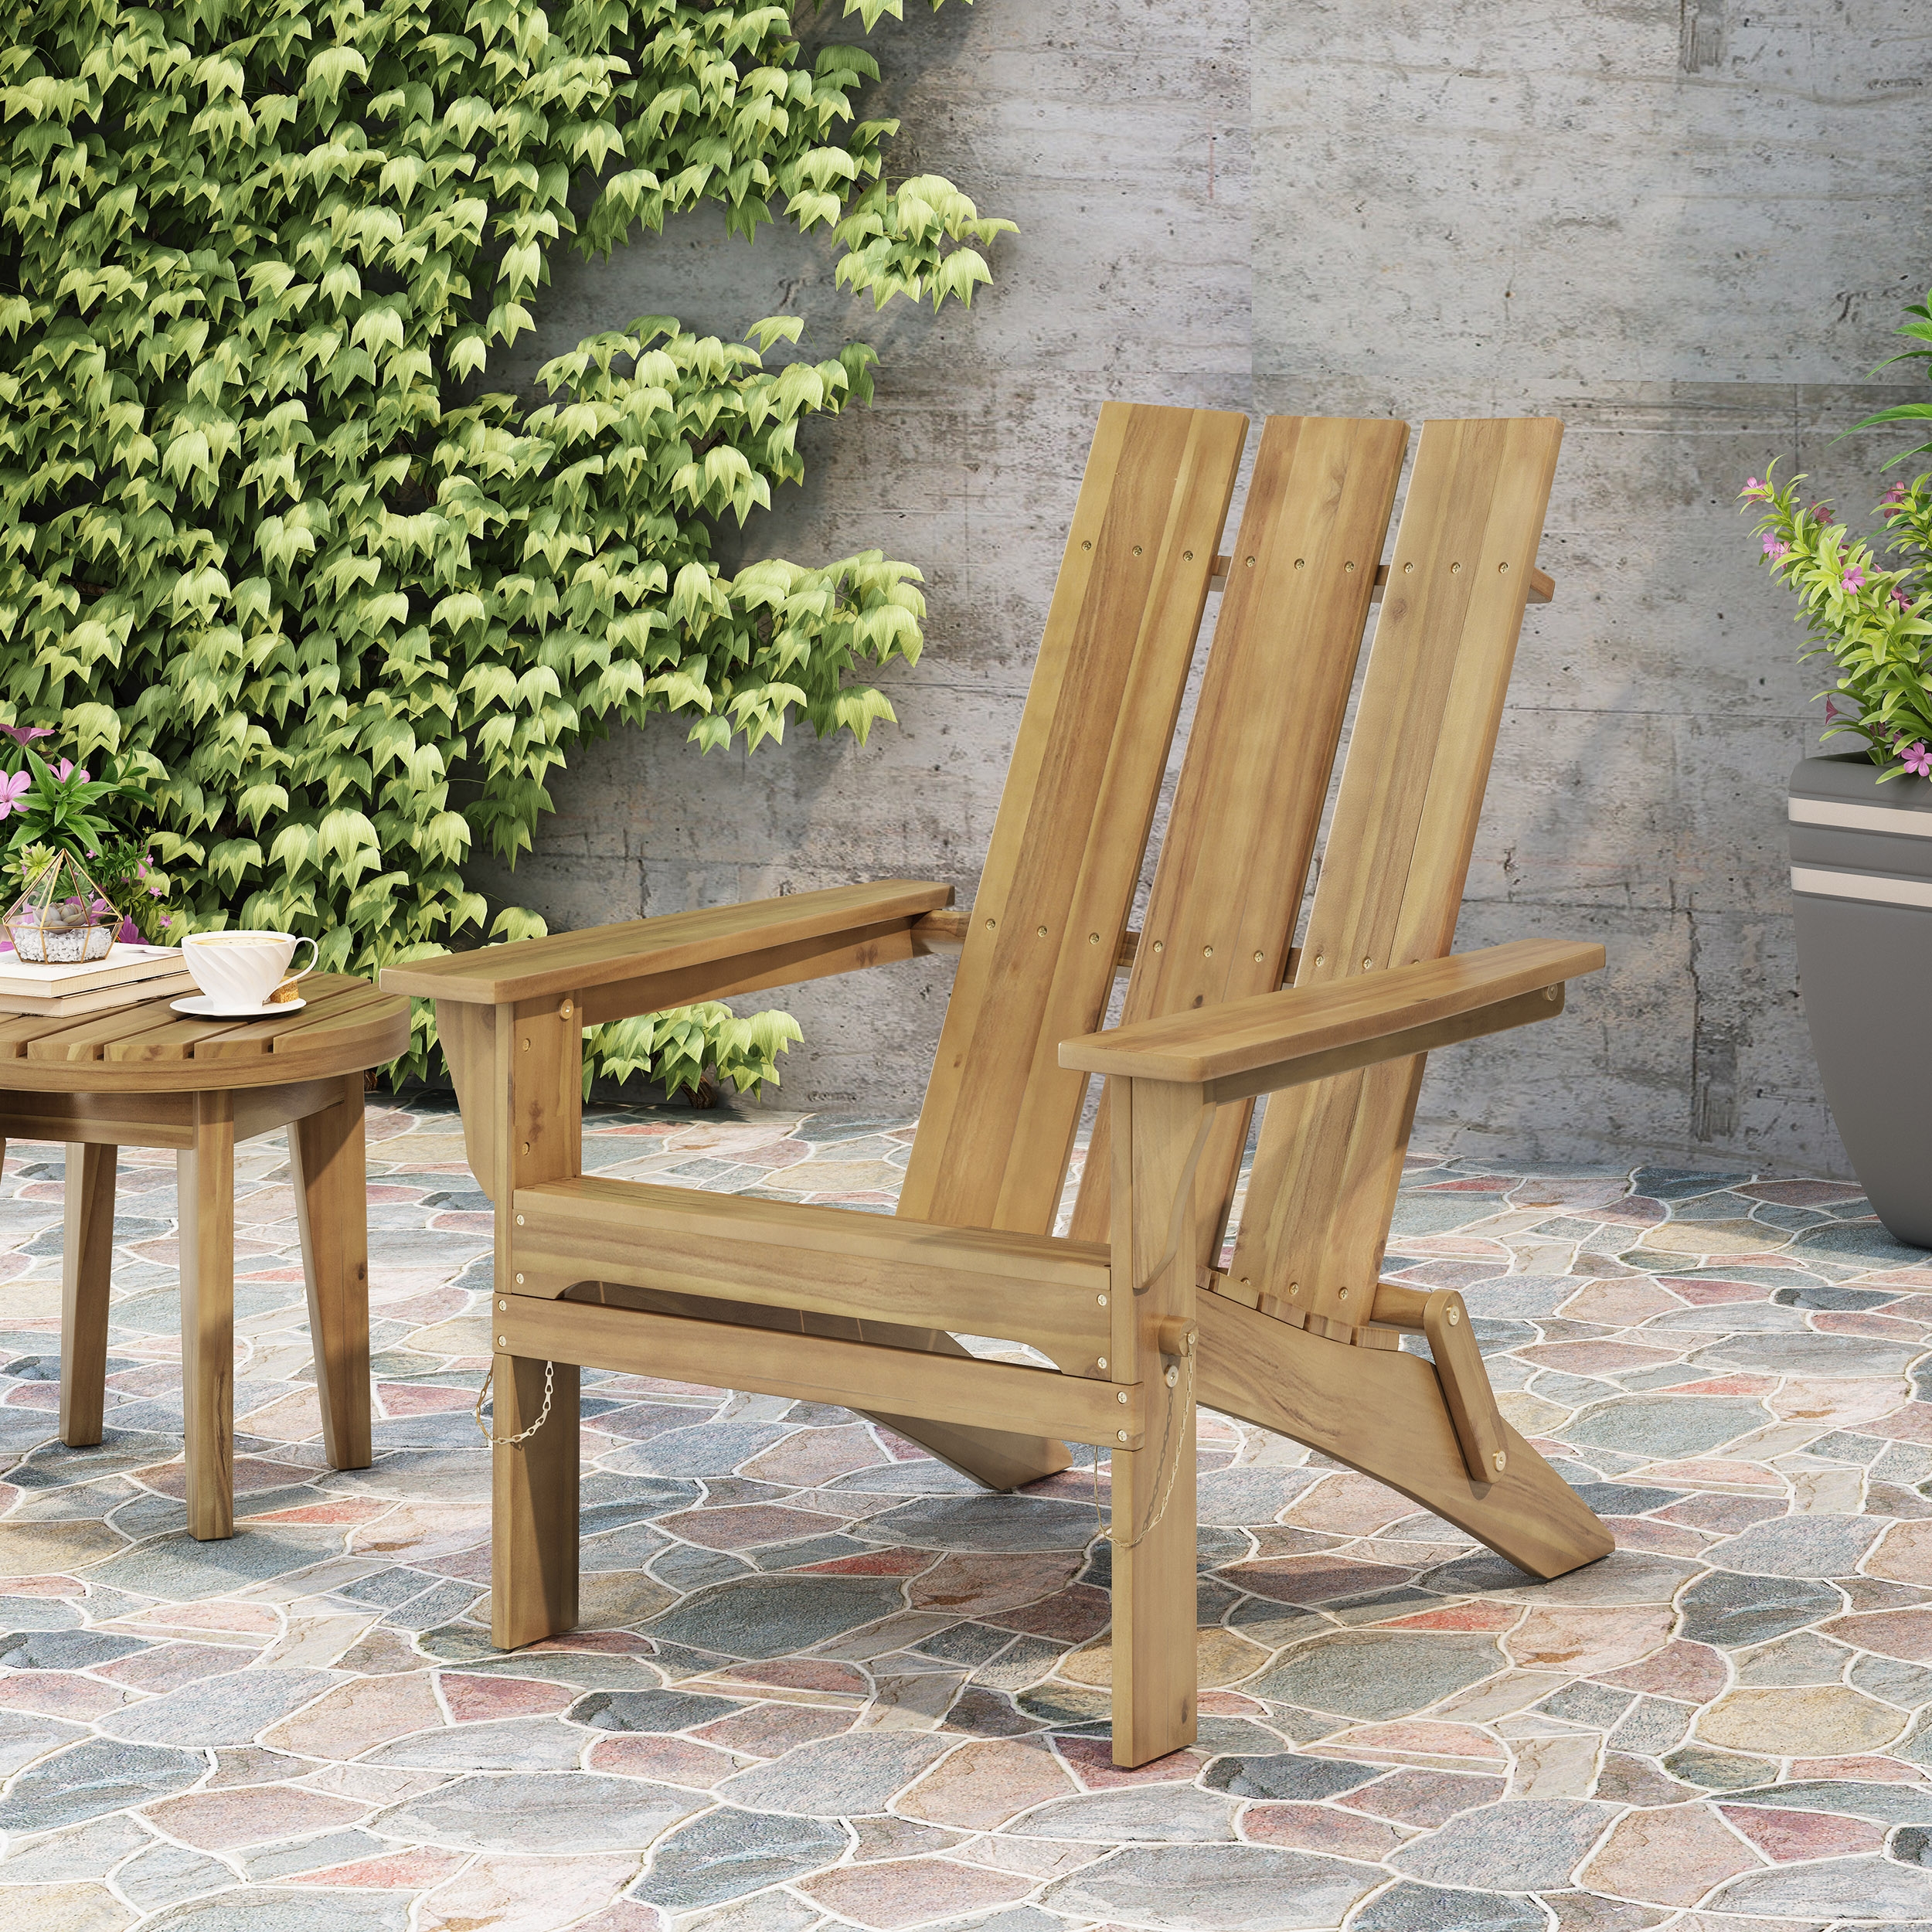 Outdoor Classic Natural Color Solid Wood Adirondack Chair Garden Lounge Chair - image 1 of 5